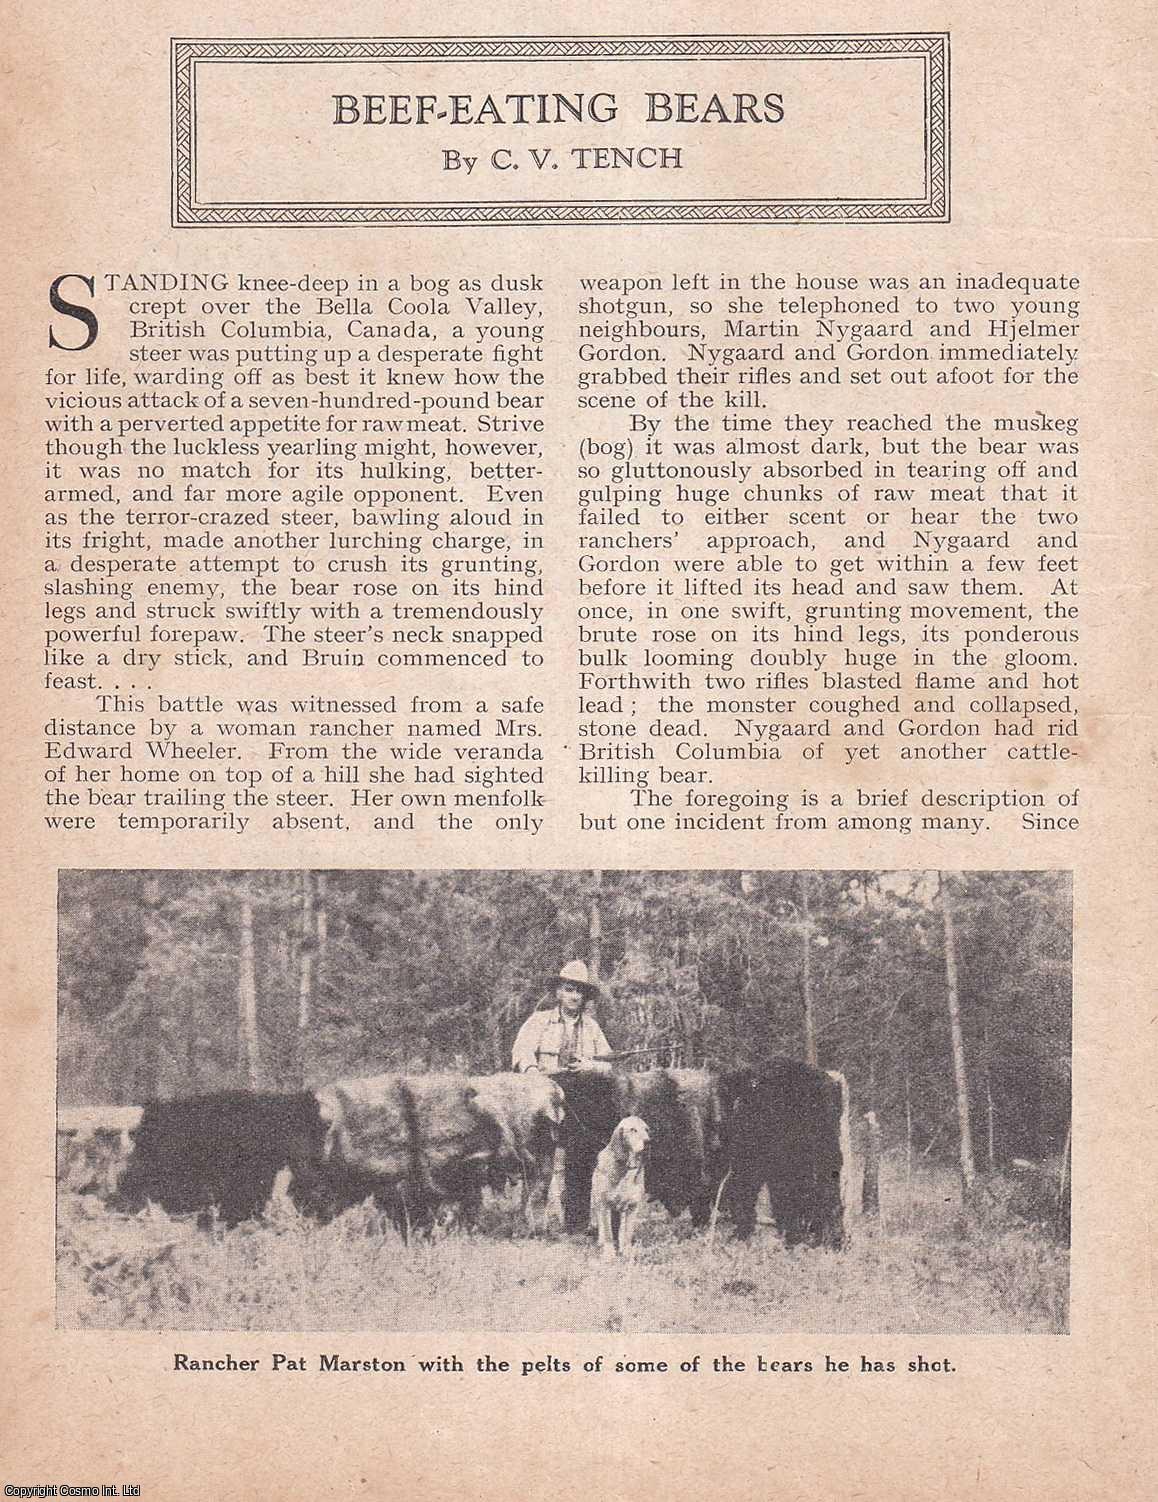 BEAR HUNTING - Beef-Eating Bears, British Columbia, Canada. By C.V. Tench. An uncommon original article from the Wide World Magazine, 1940.